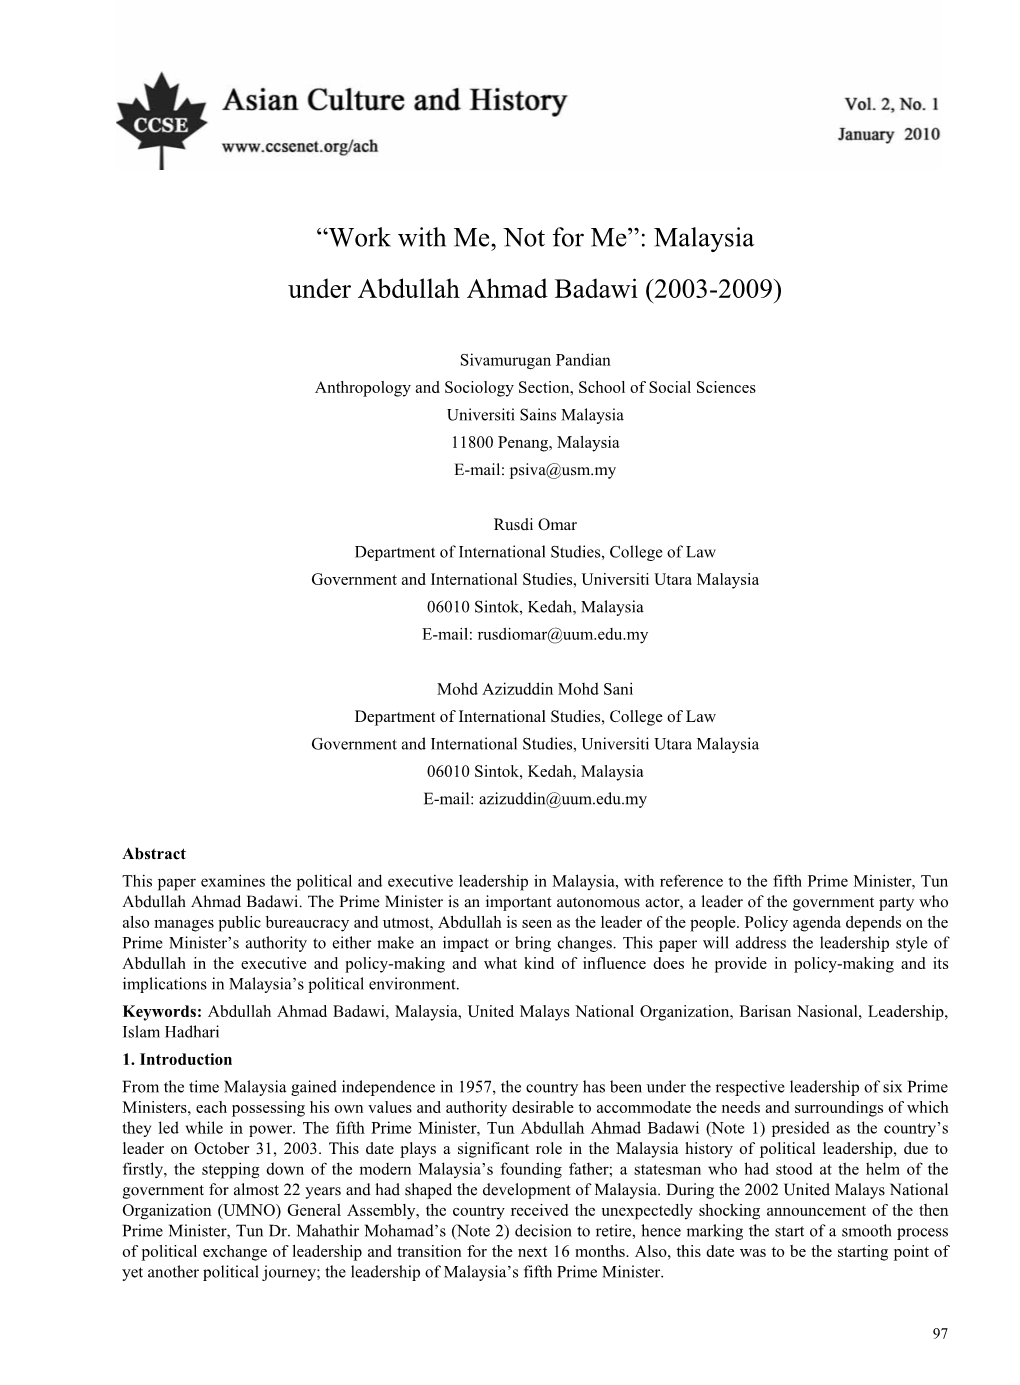 “Work with Me, Not for Me”: Malaysia Under Abdullah Ahmad Badawi (2003-2009)